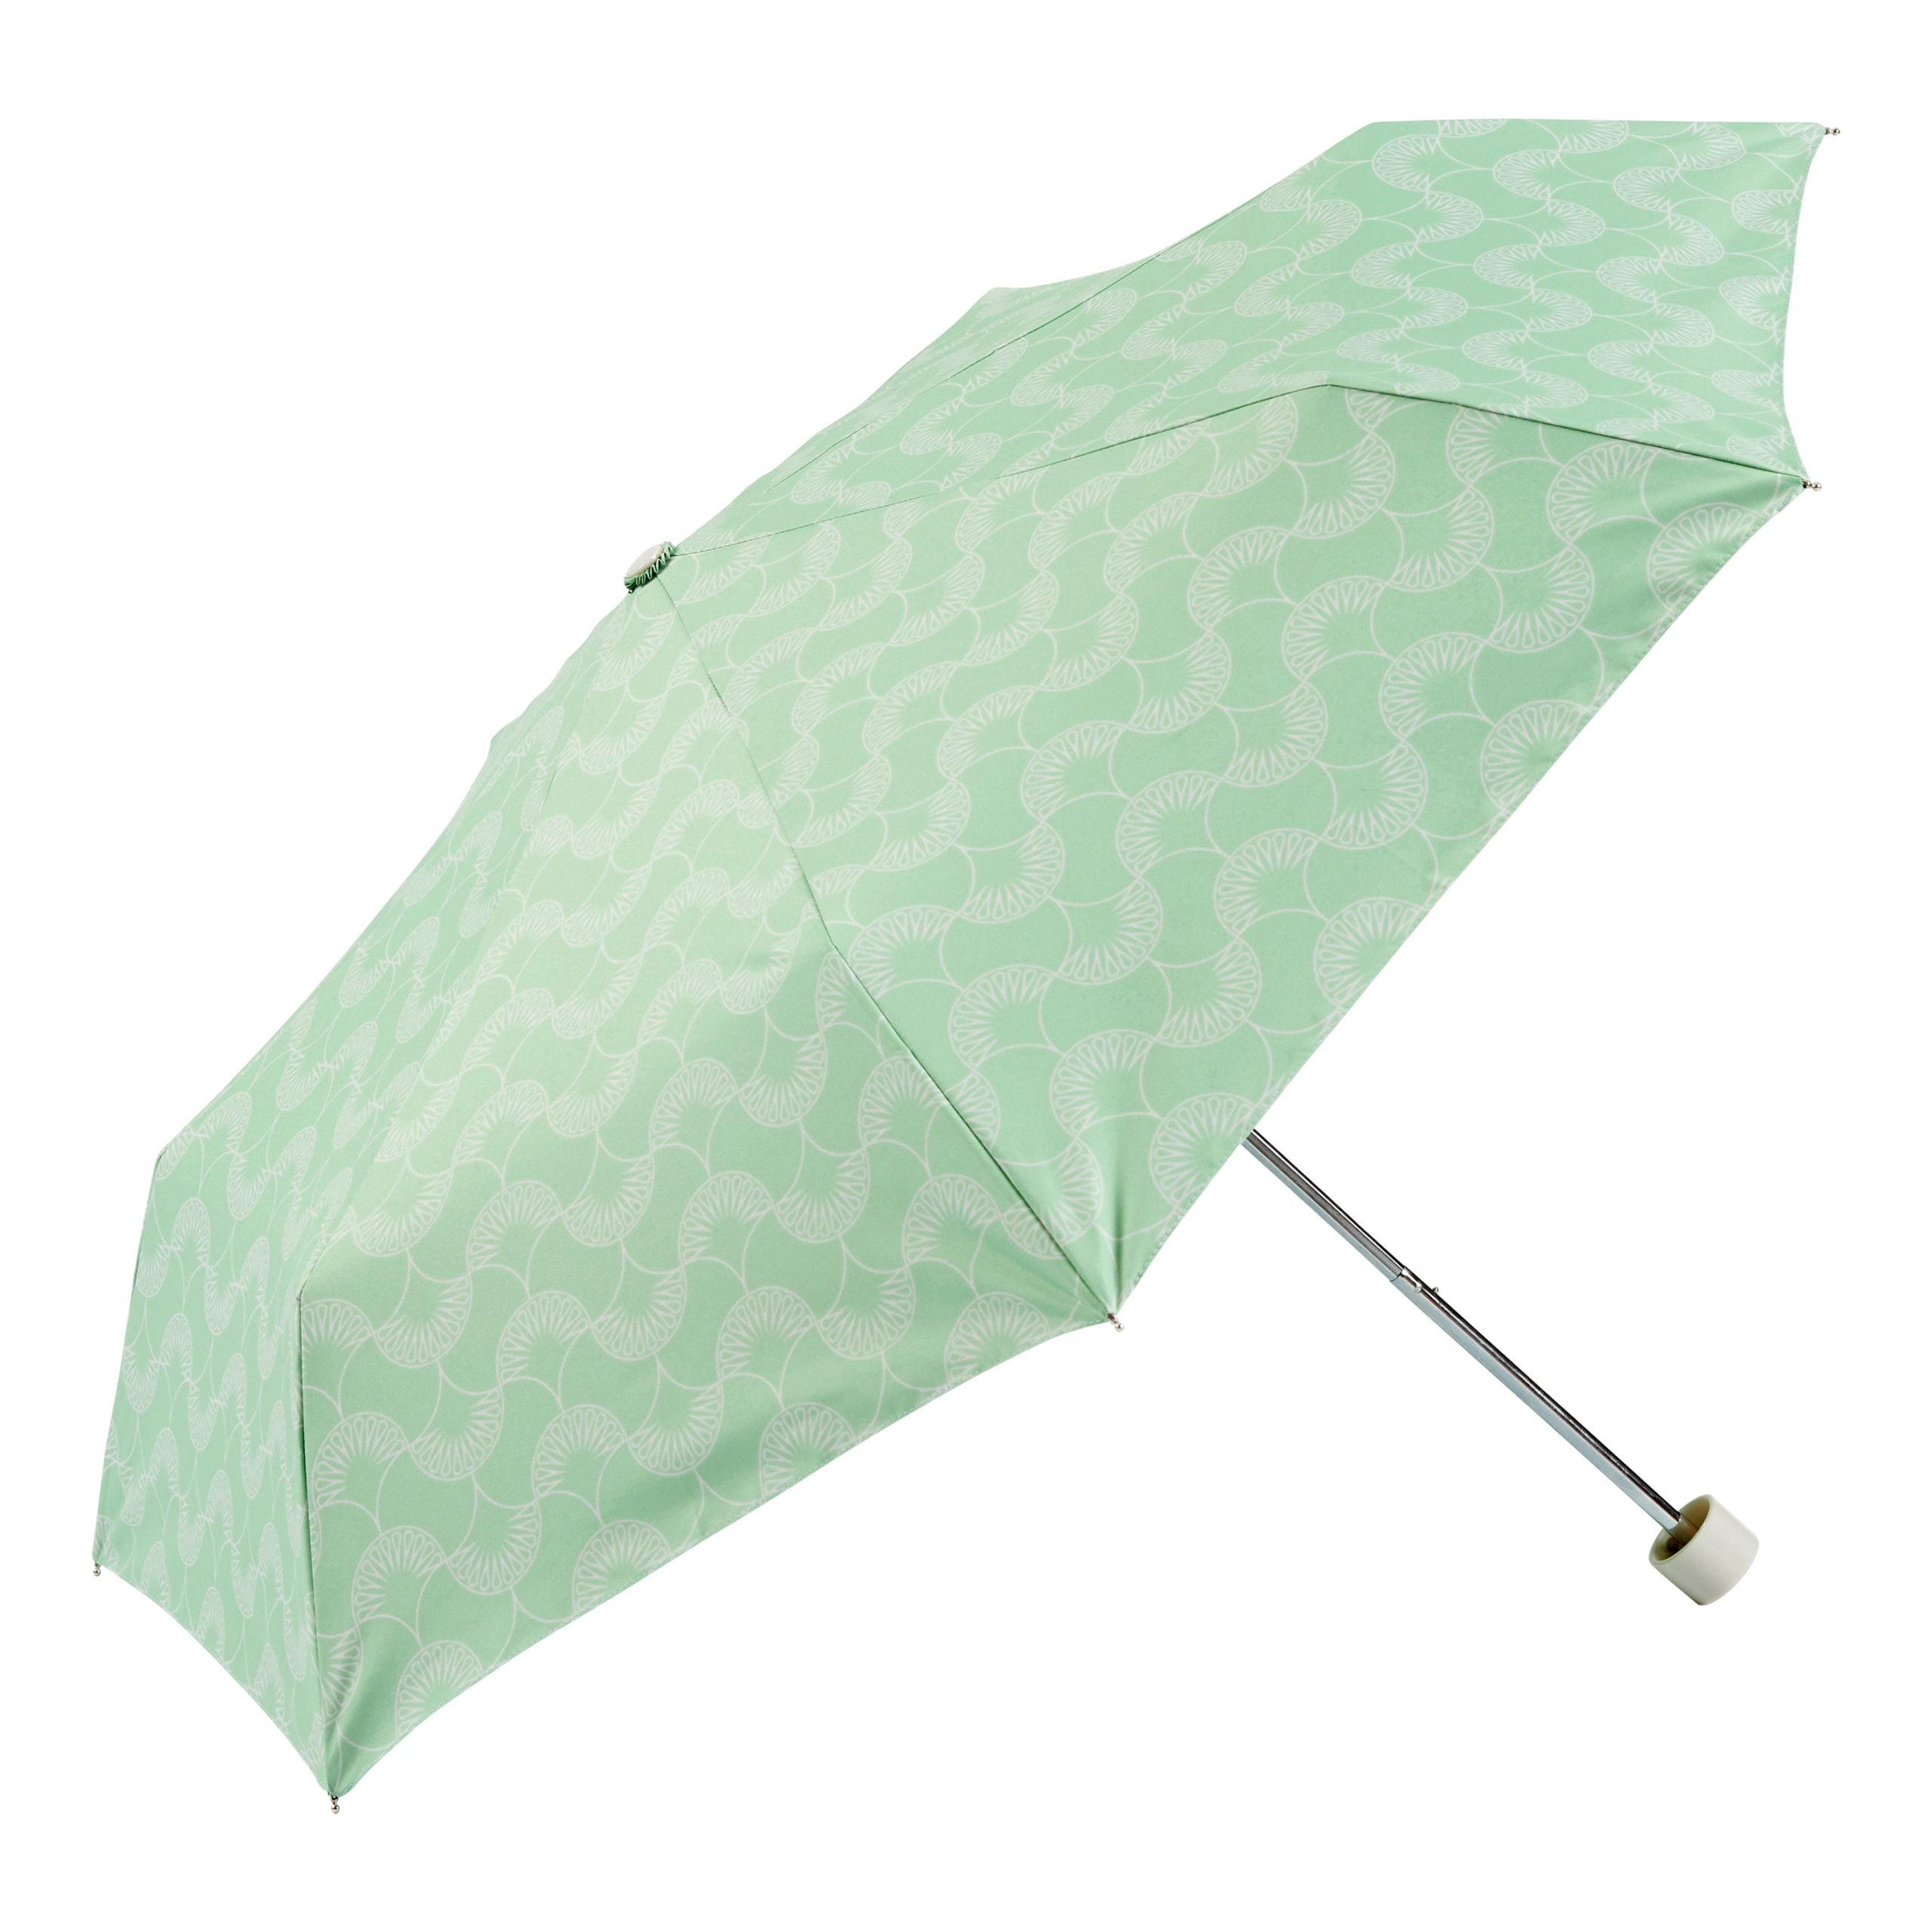 Ladies UV Protective Compact Umbrella - mint green patterned - open - side view